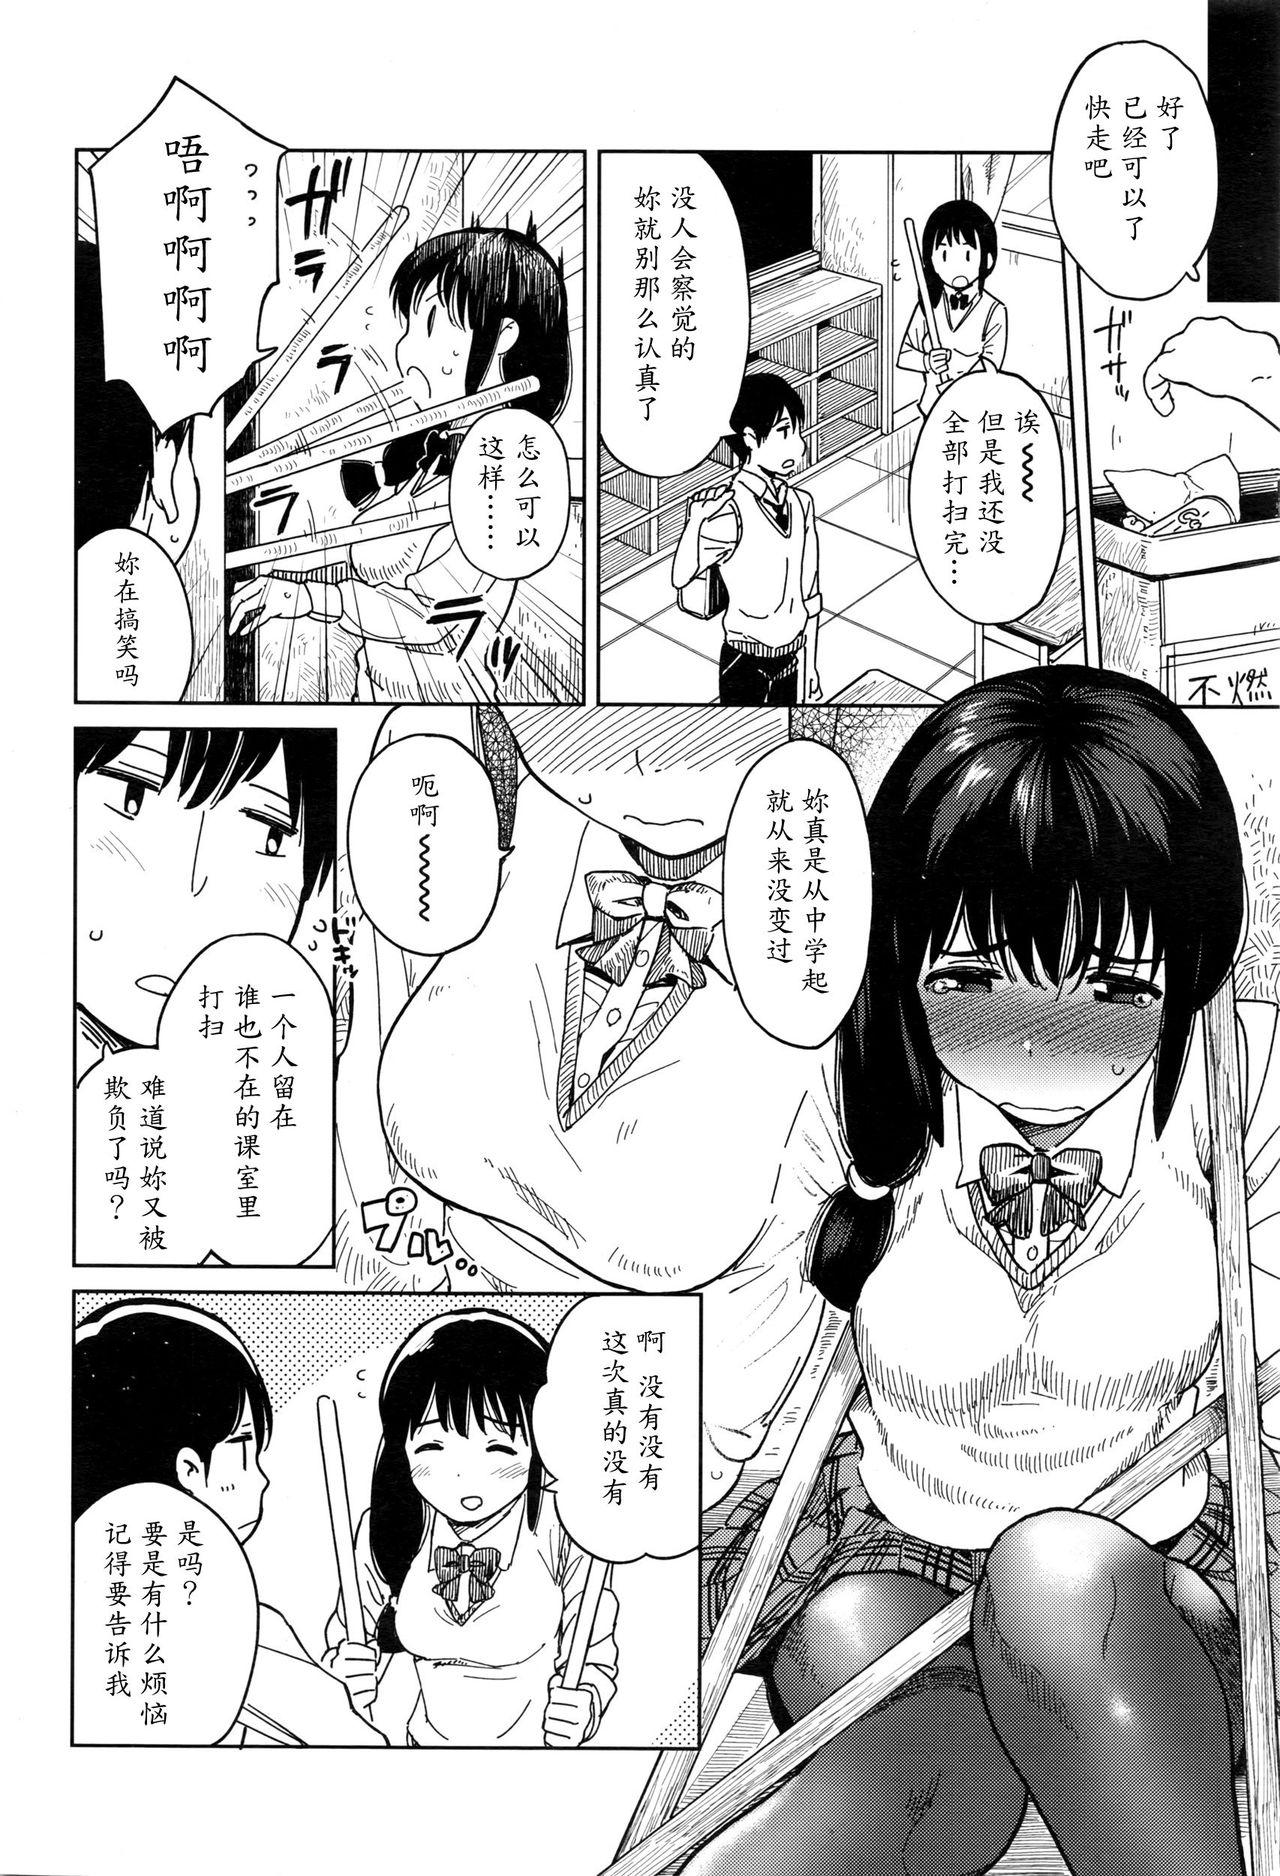 Tranny Houkago Rendezvous | Afterschool Rendezvous Sologirl - Page 2